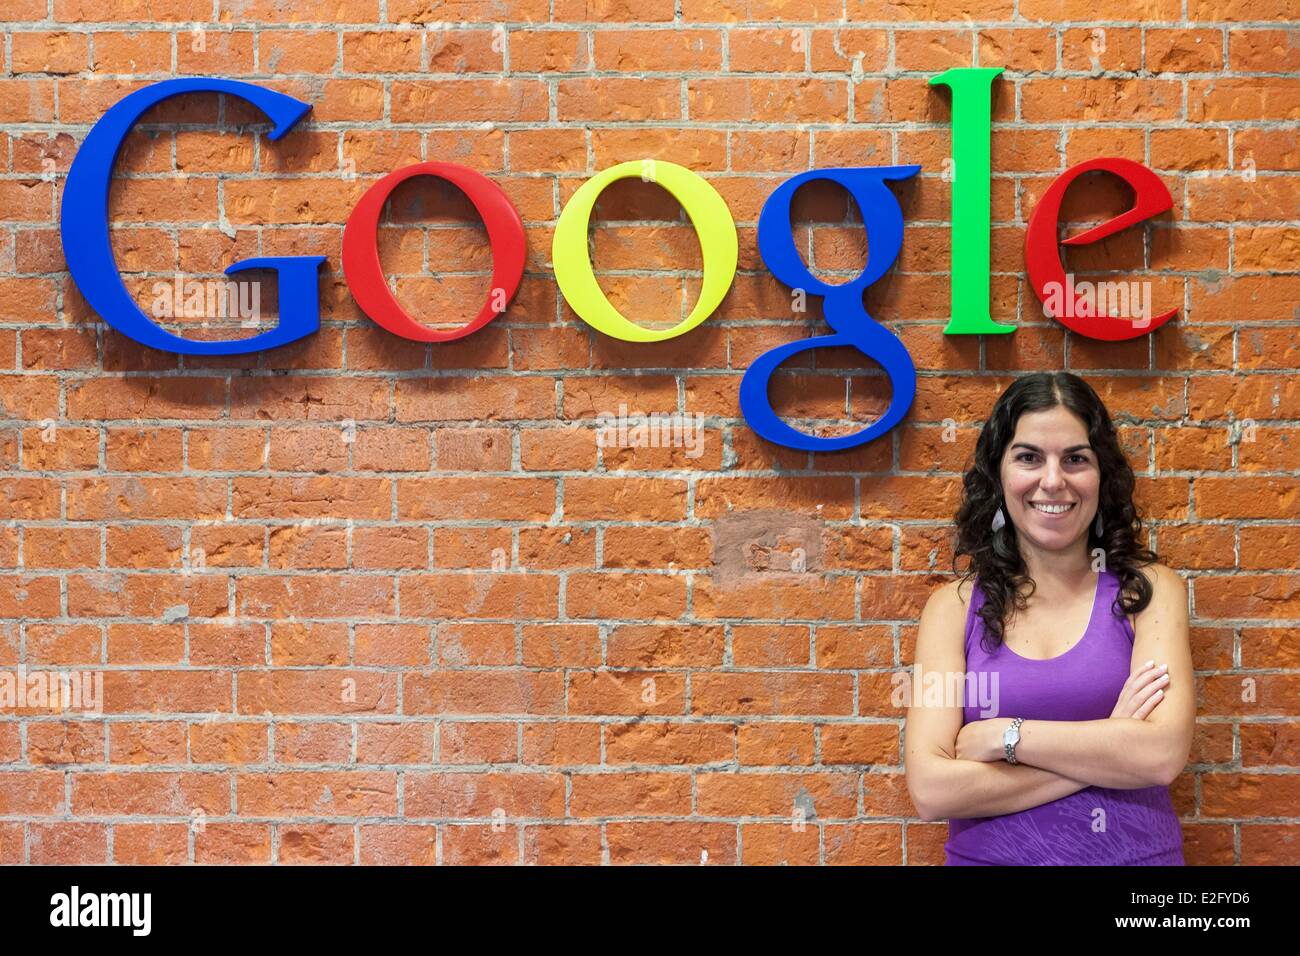 Argentina Buenos Aires Puerto Madero district headquarters of Google Argentina an employee at the logo Stock Photo